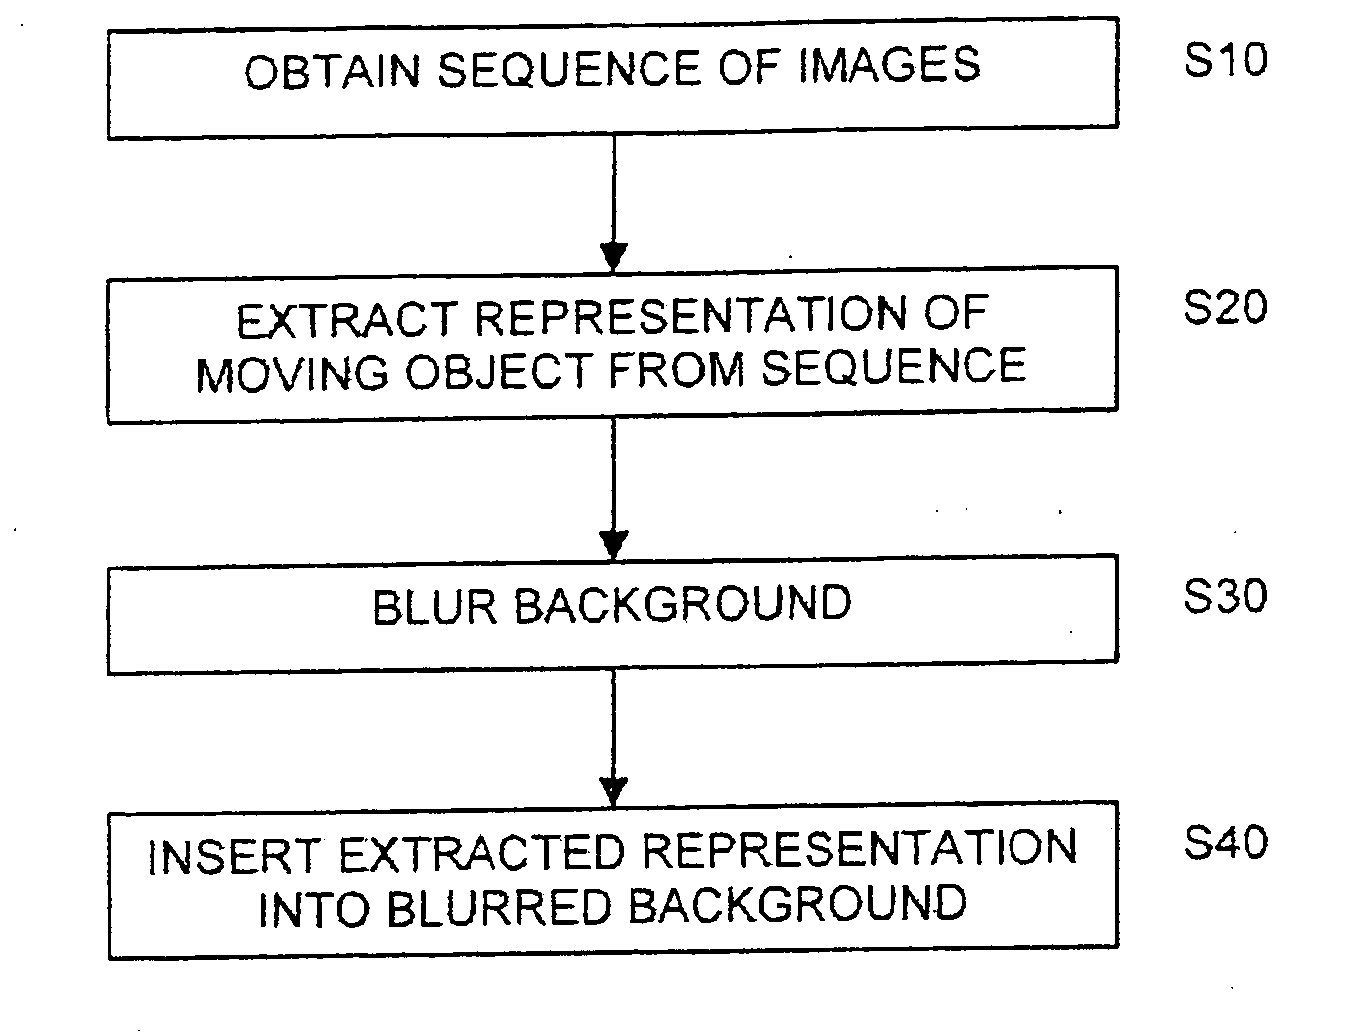 Segmenting images and simulating motion blur using an image sequence